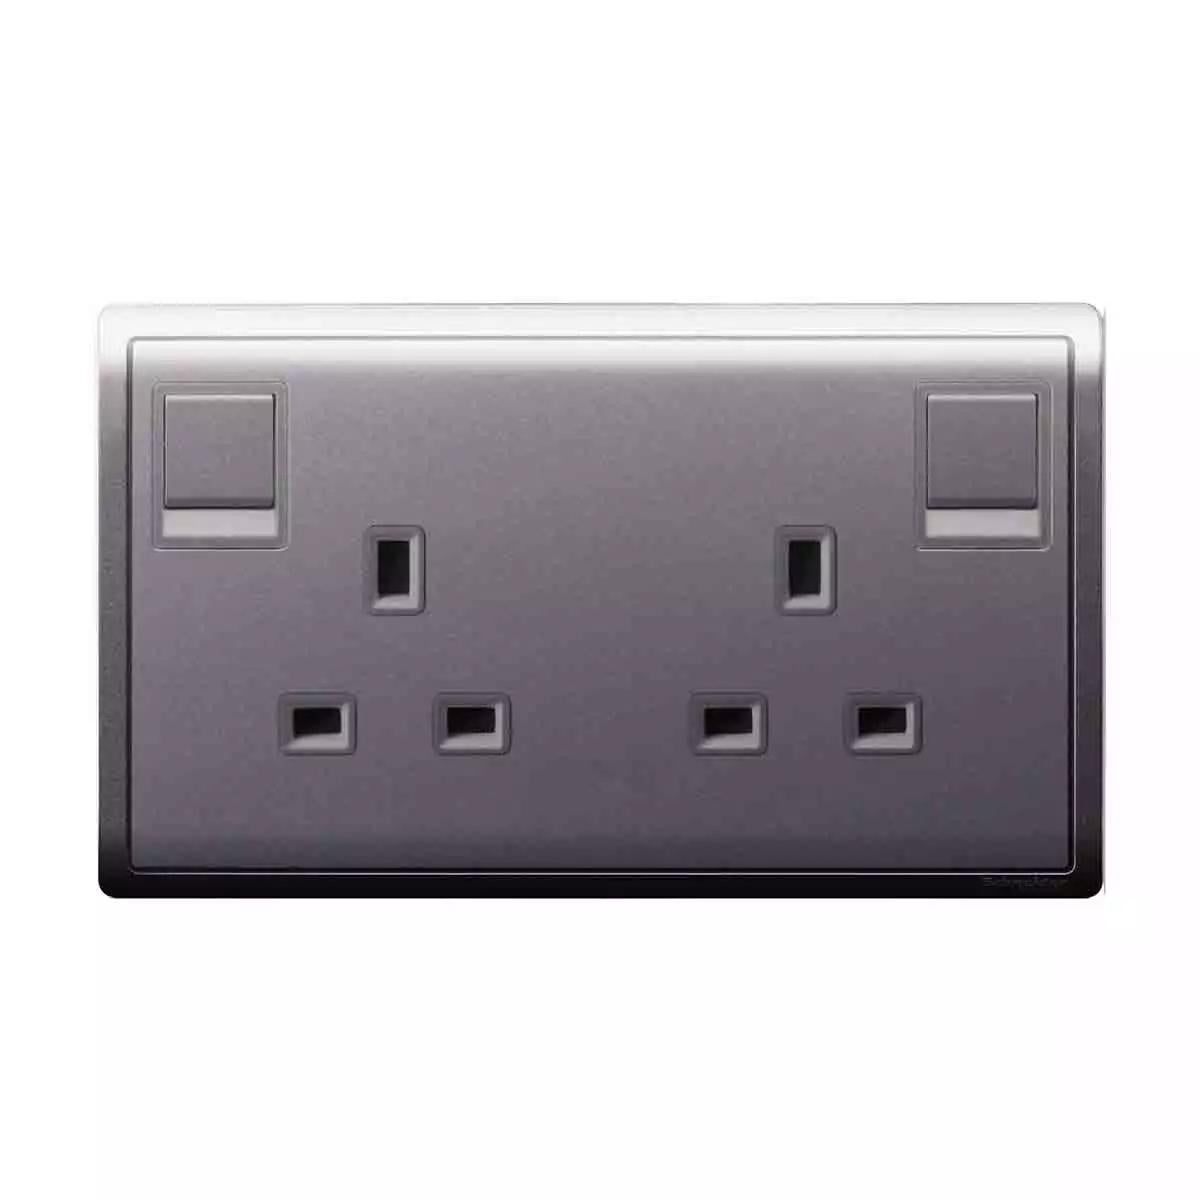 Pieno 13A 250V Twin Switched Socket Lavender Silver